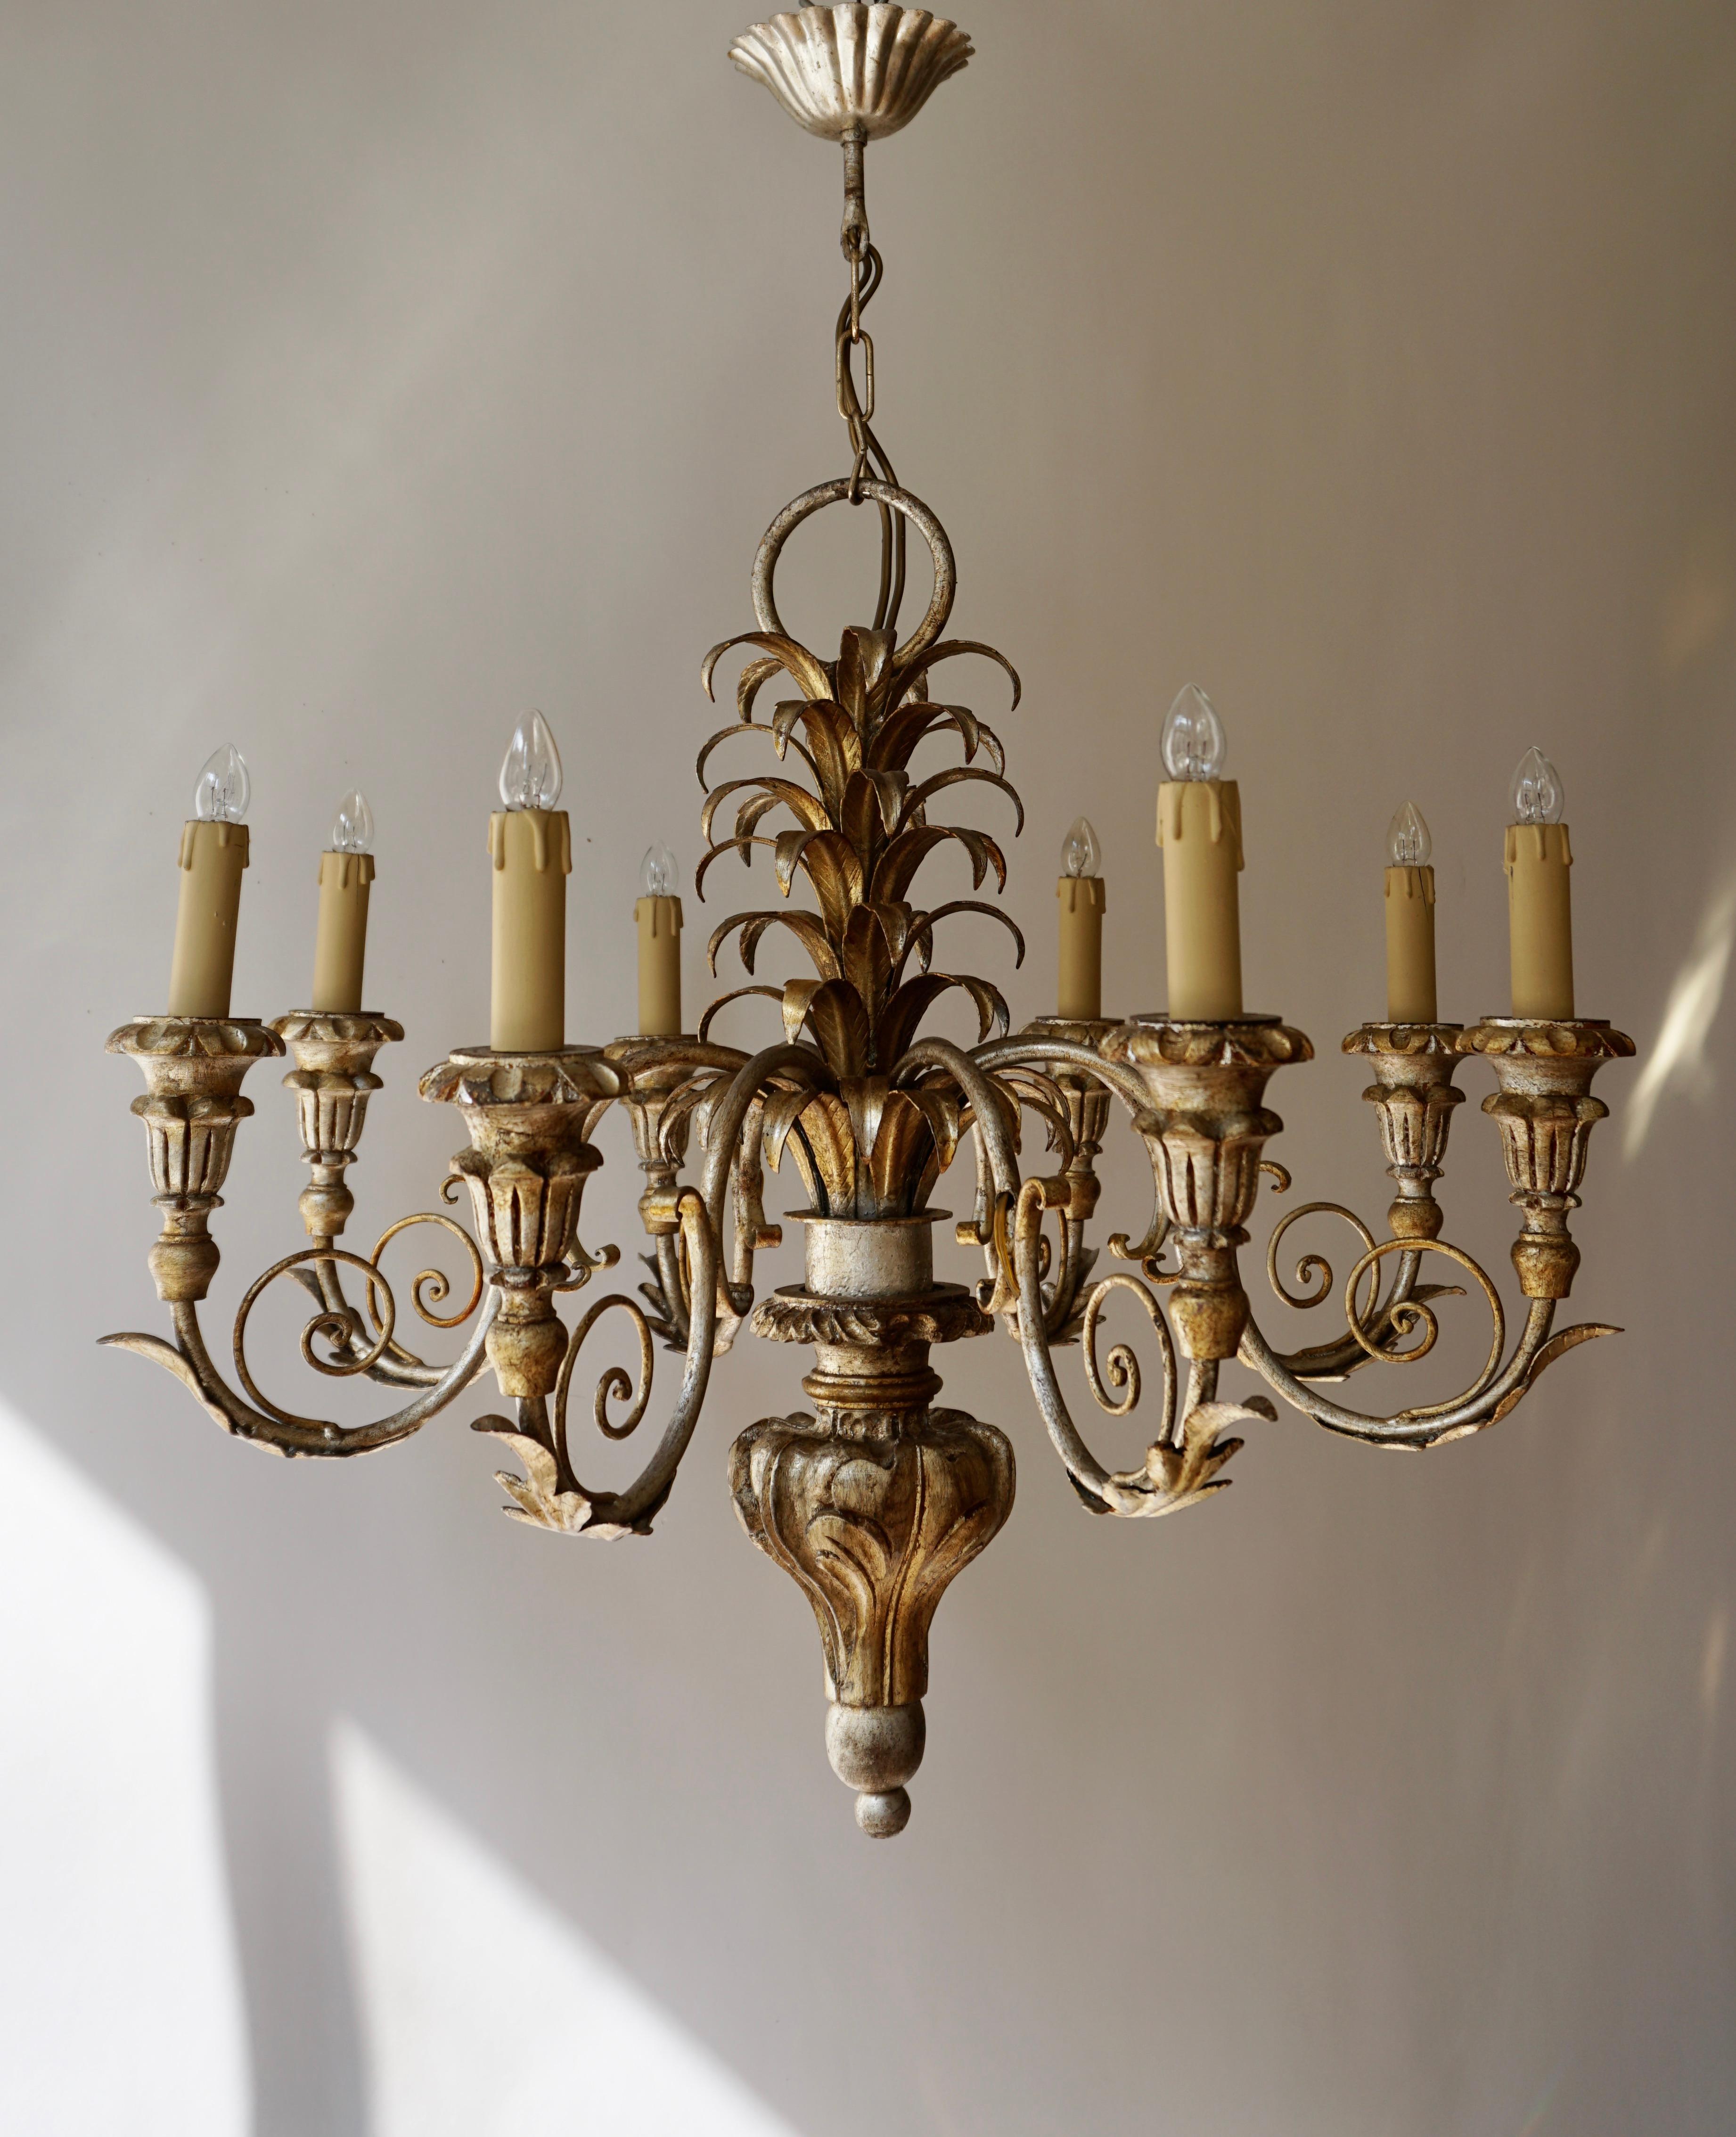 Hollywood Regency Pineapple Chandelier in Lacquered Wood and Gilt Brass, 1950s For Sale